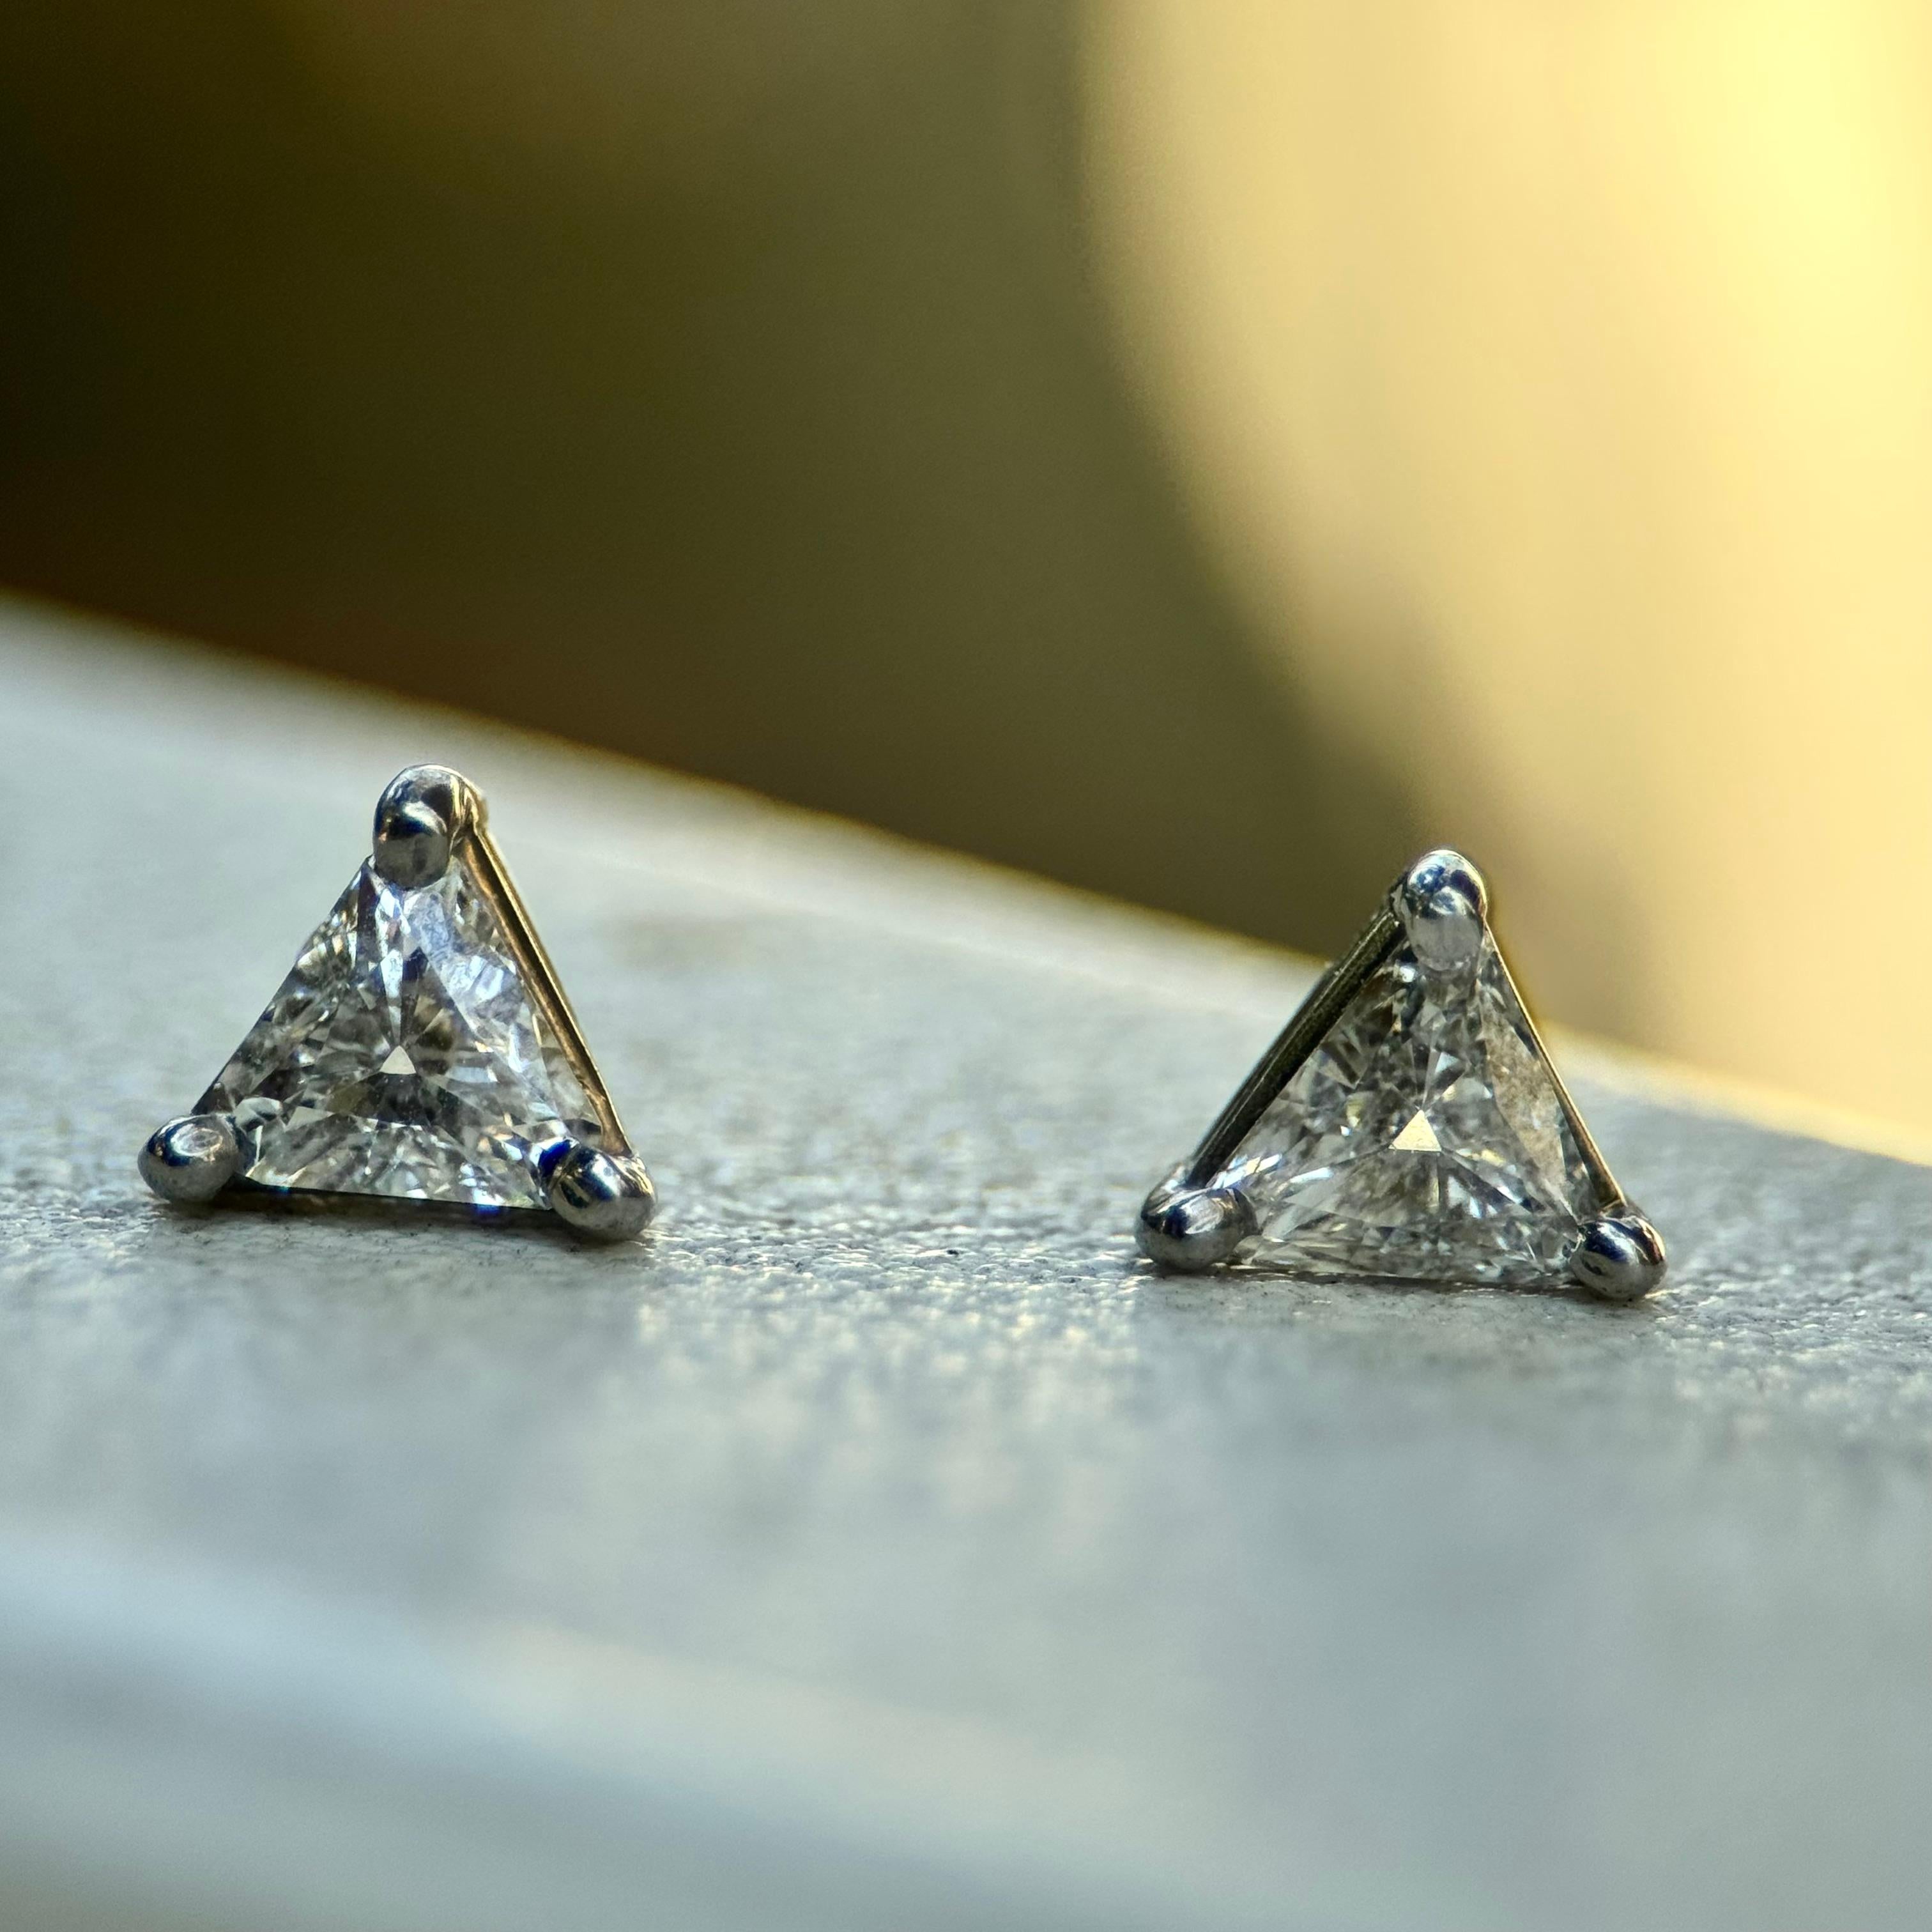 Set in 14k white gold, these beautiful trilliant diamond earrings add a geometric pop of sparkle. They are delicately set so that the diamond is the primary focus, mounted with tiny prong settings in each corner. A refreshing alternative to the